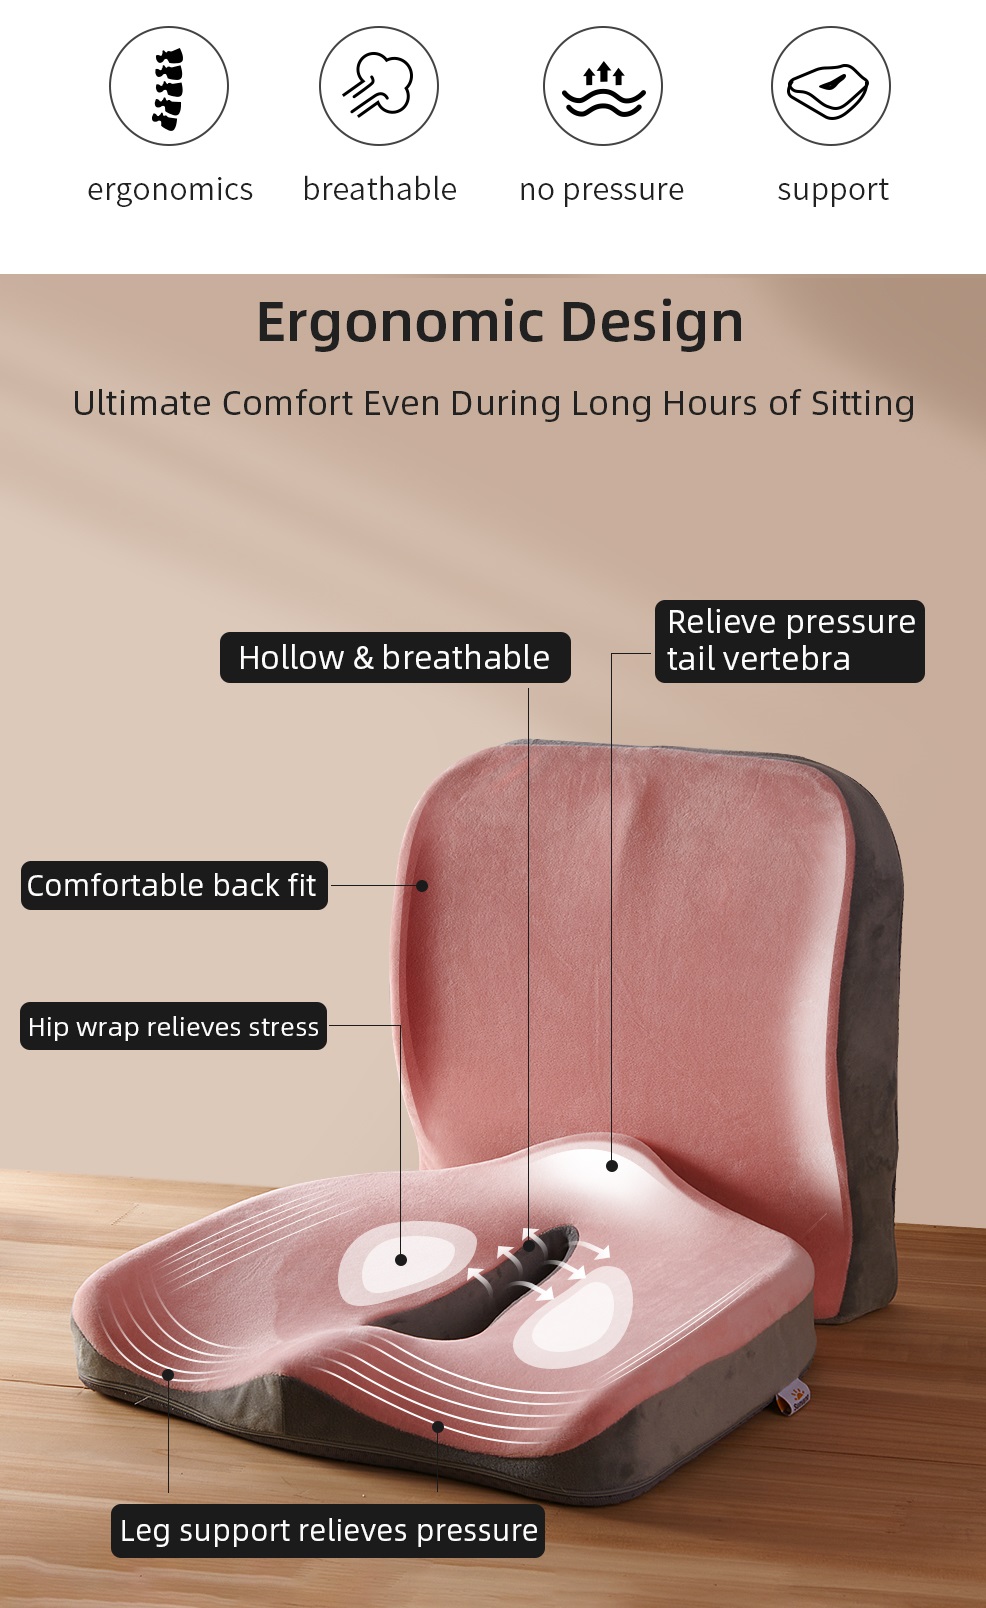 Pregnancy Seat Cushion: Memory Foam Pad for Office Chairs, Pain Relief and Improved Comfort